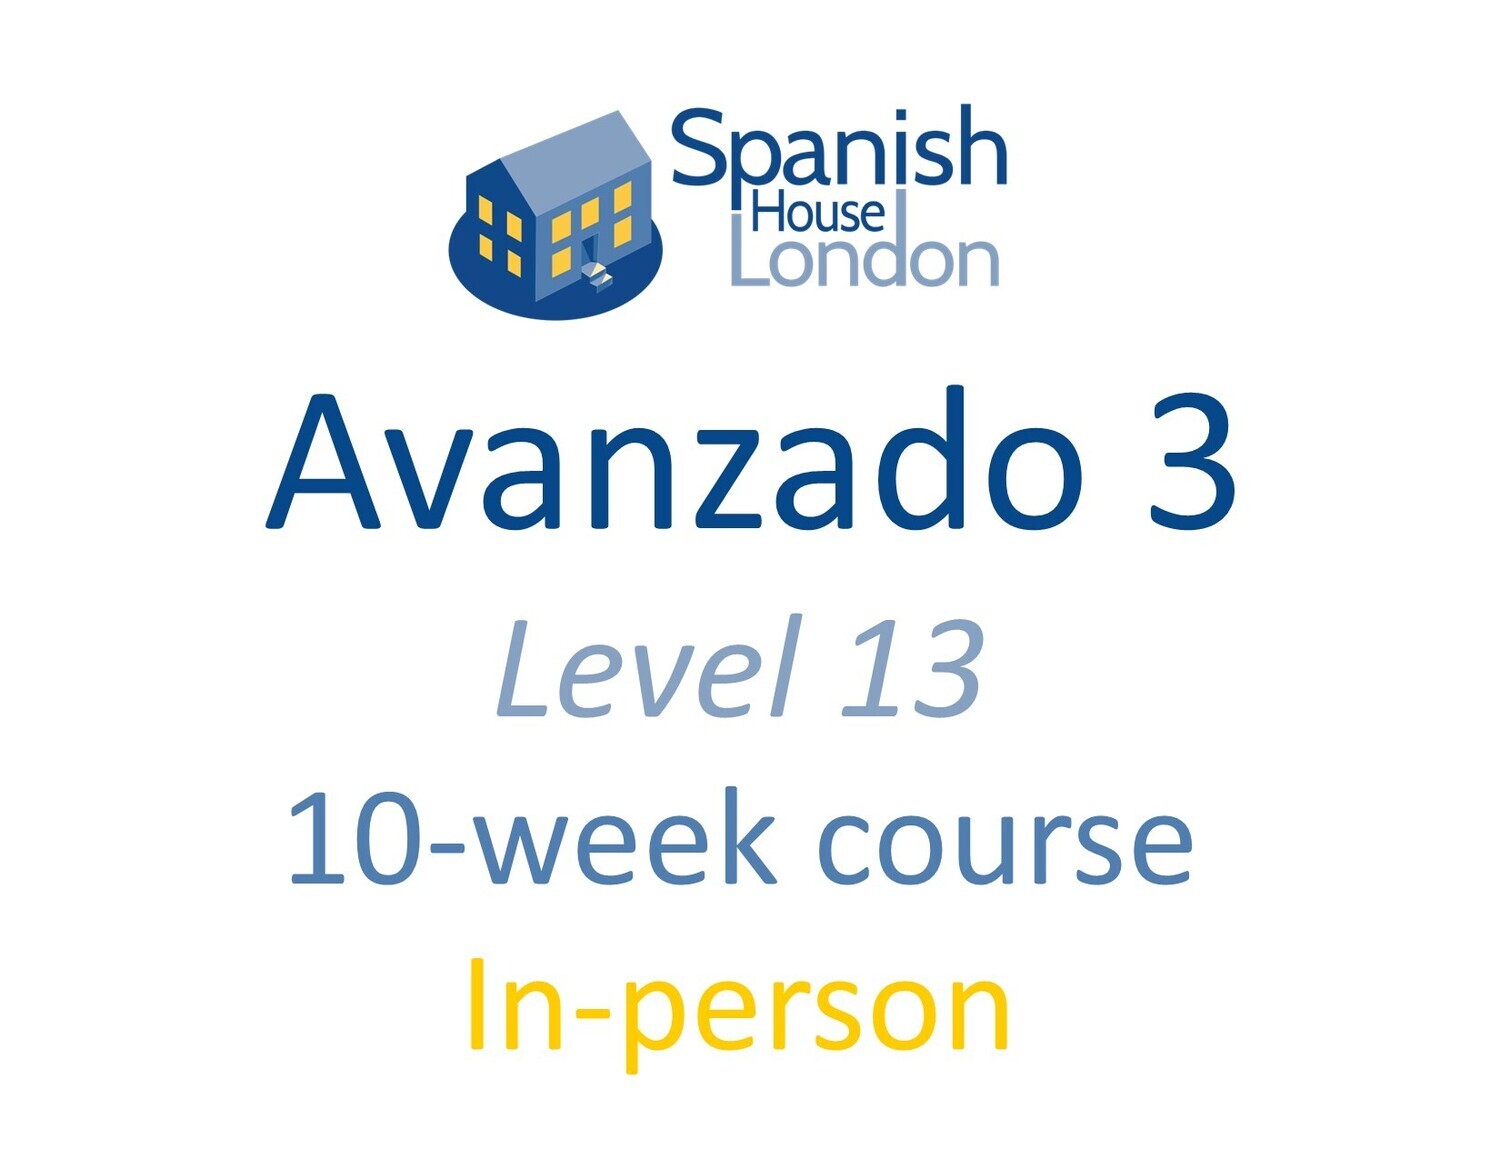 Avanzado 3 Course starting on 7th August at 6pm in Euston